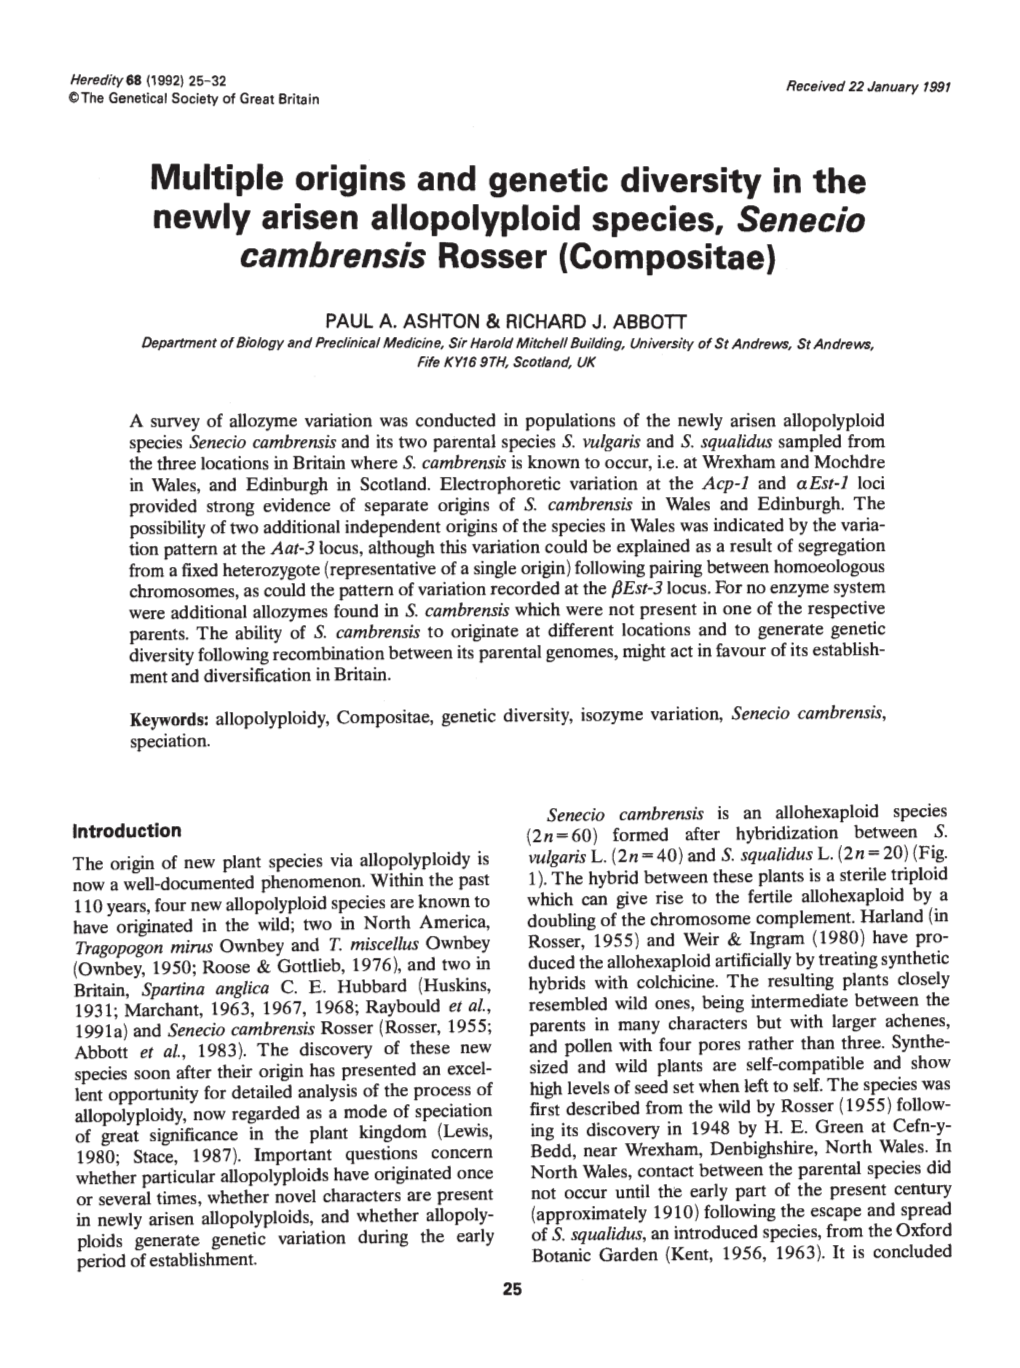 Multiple Origins and Genetic Diversity in the Newly Arisen Allopolyploid Species, Seneclo Cambrensis Rosser (Compositae)